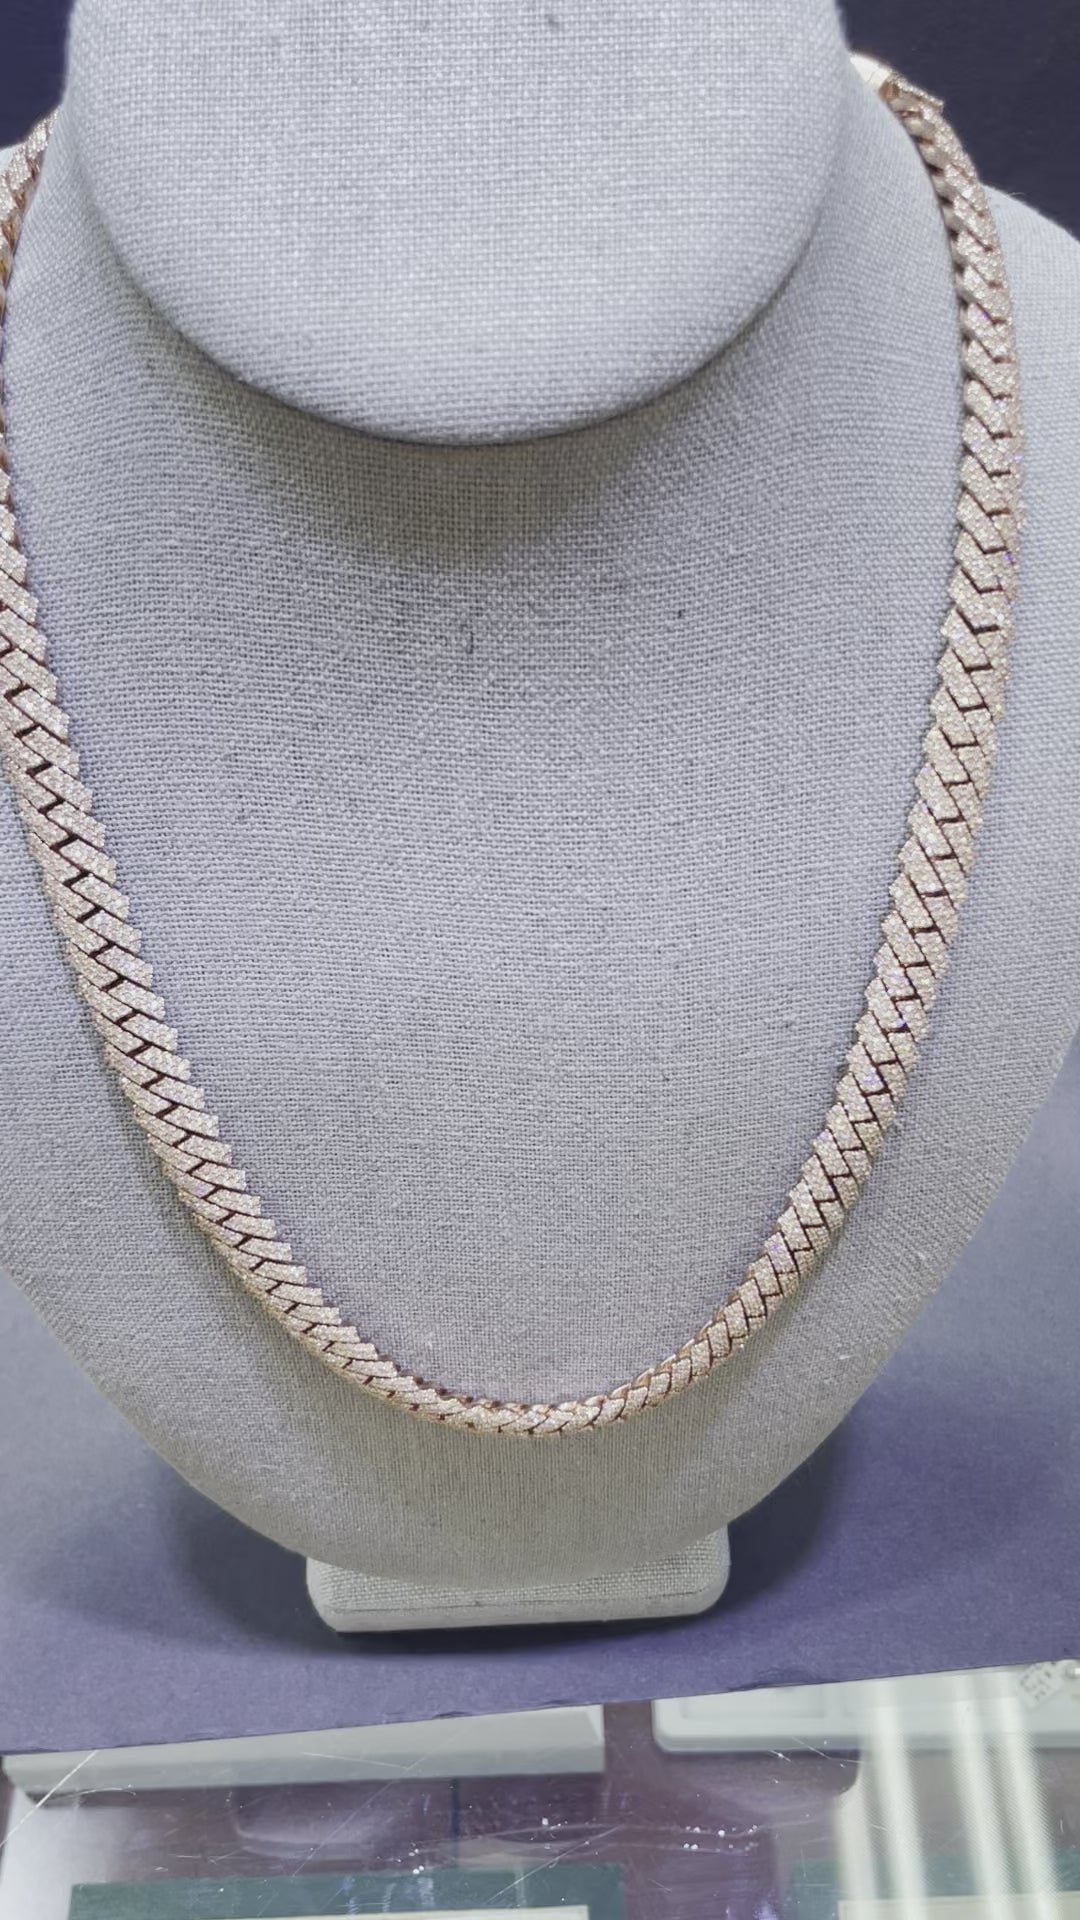 10k VVS "Iced" Bust Down Rose Gold Miami Cuban Link Chain, 140 grams and 30 cts of Natural VVS1 Diamonds